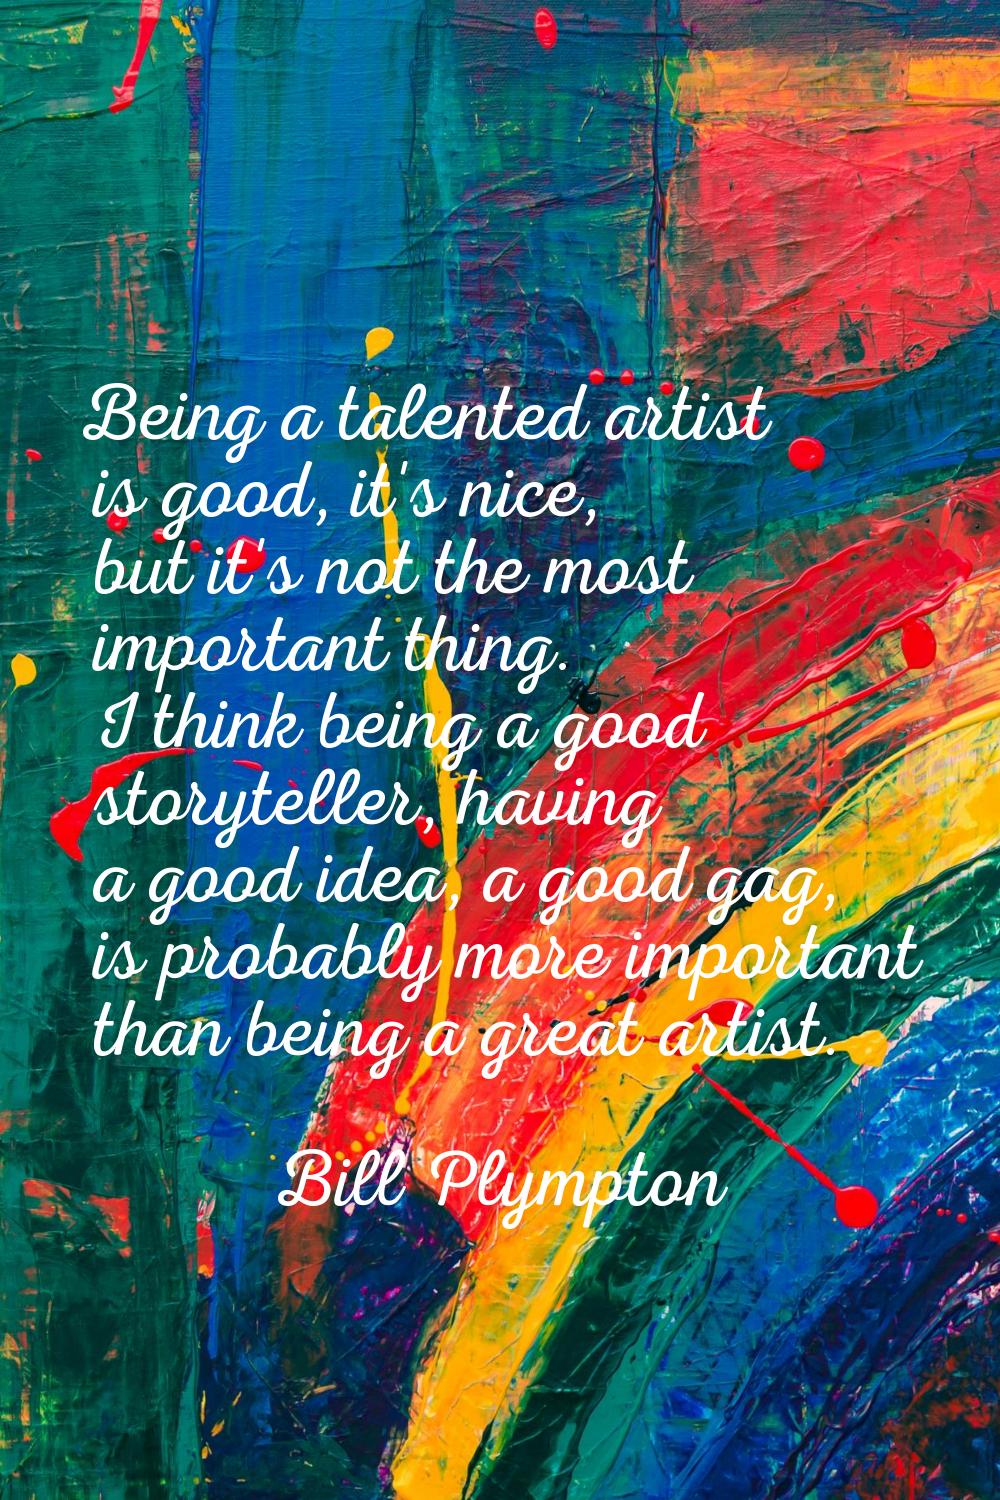 Being a talented artist is good, it's nice, but it's not the most important thing. I think being a 